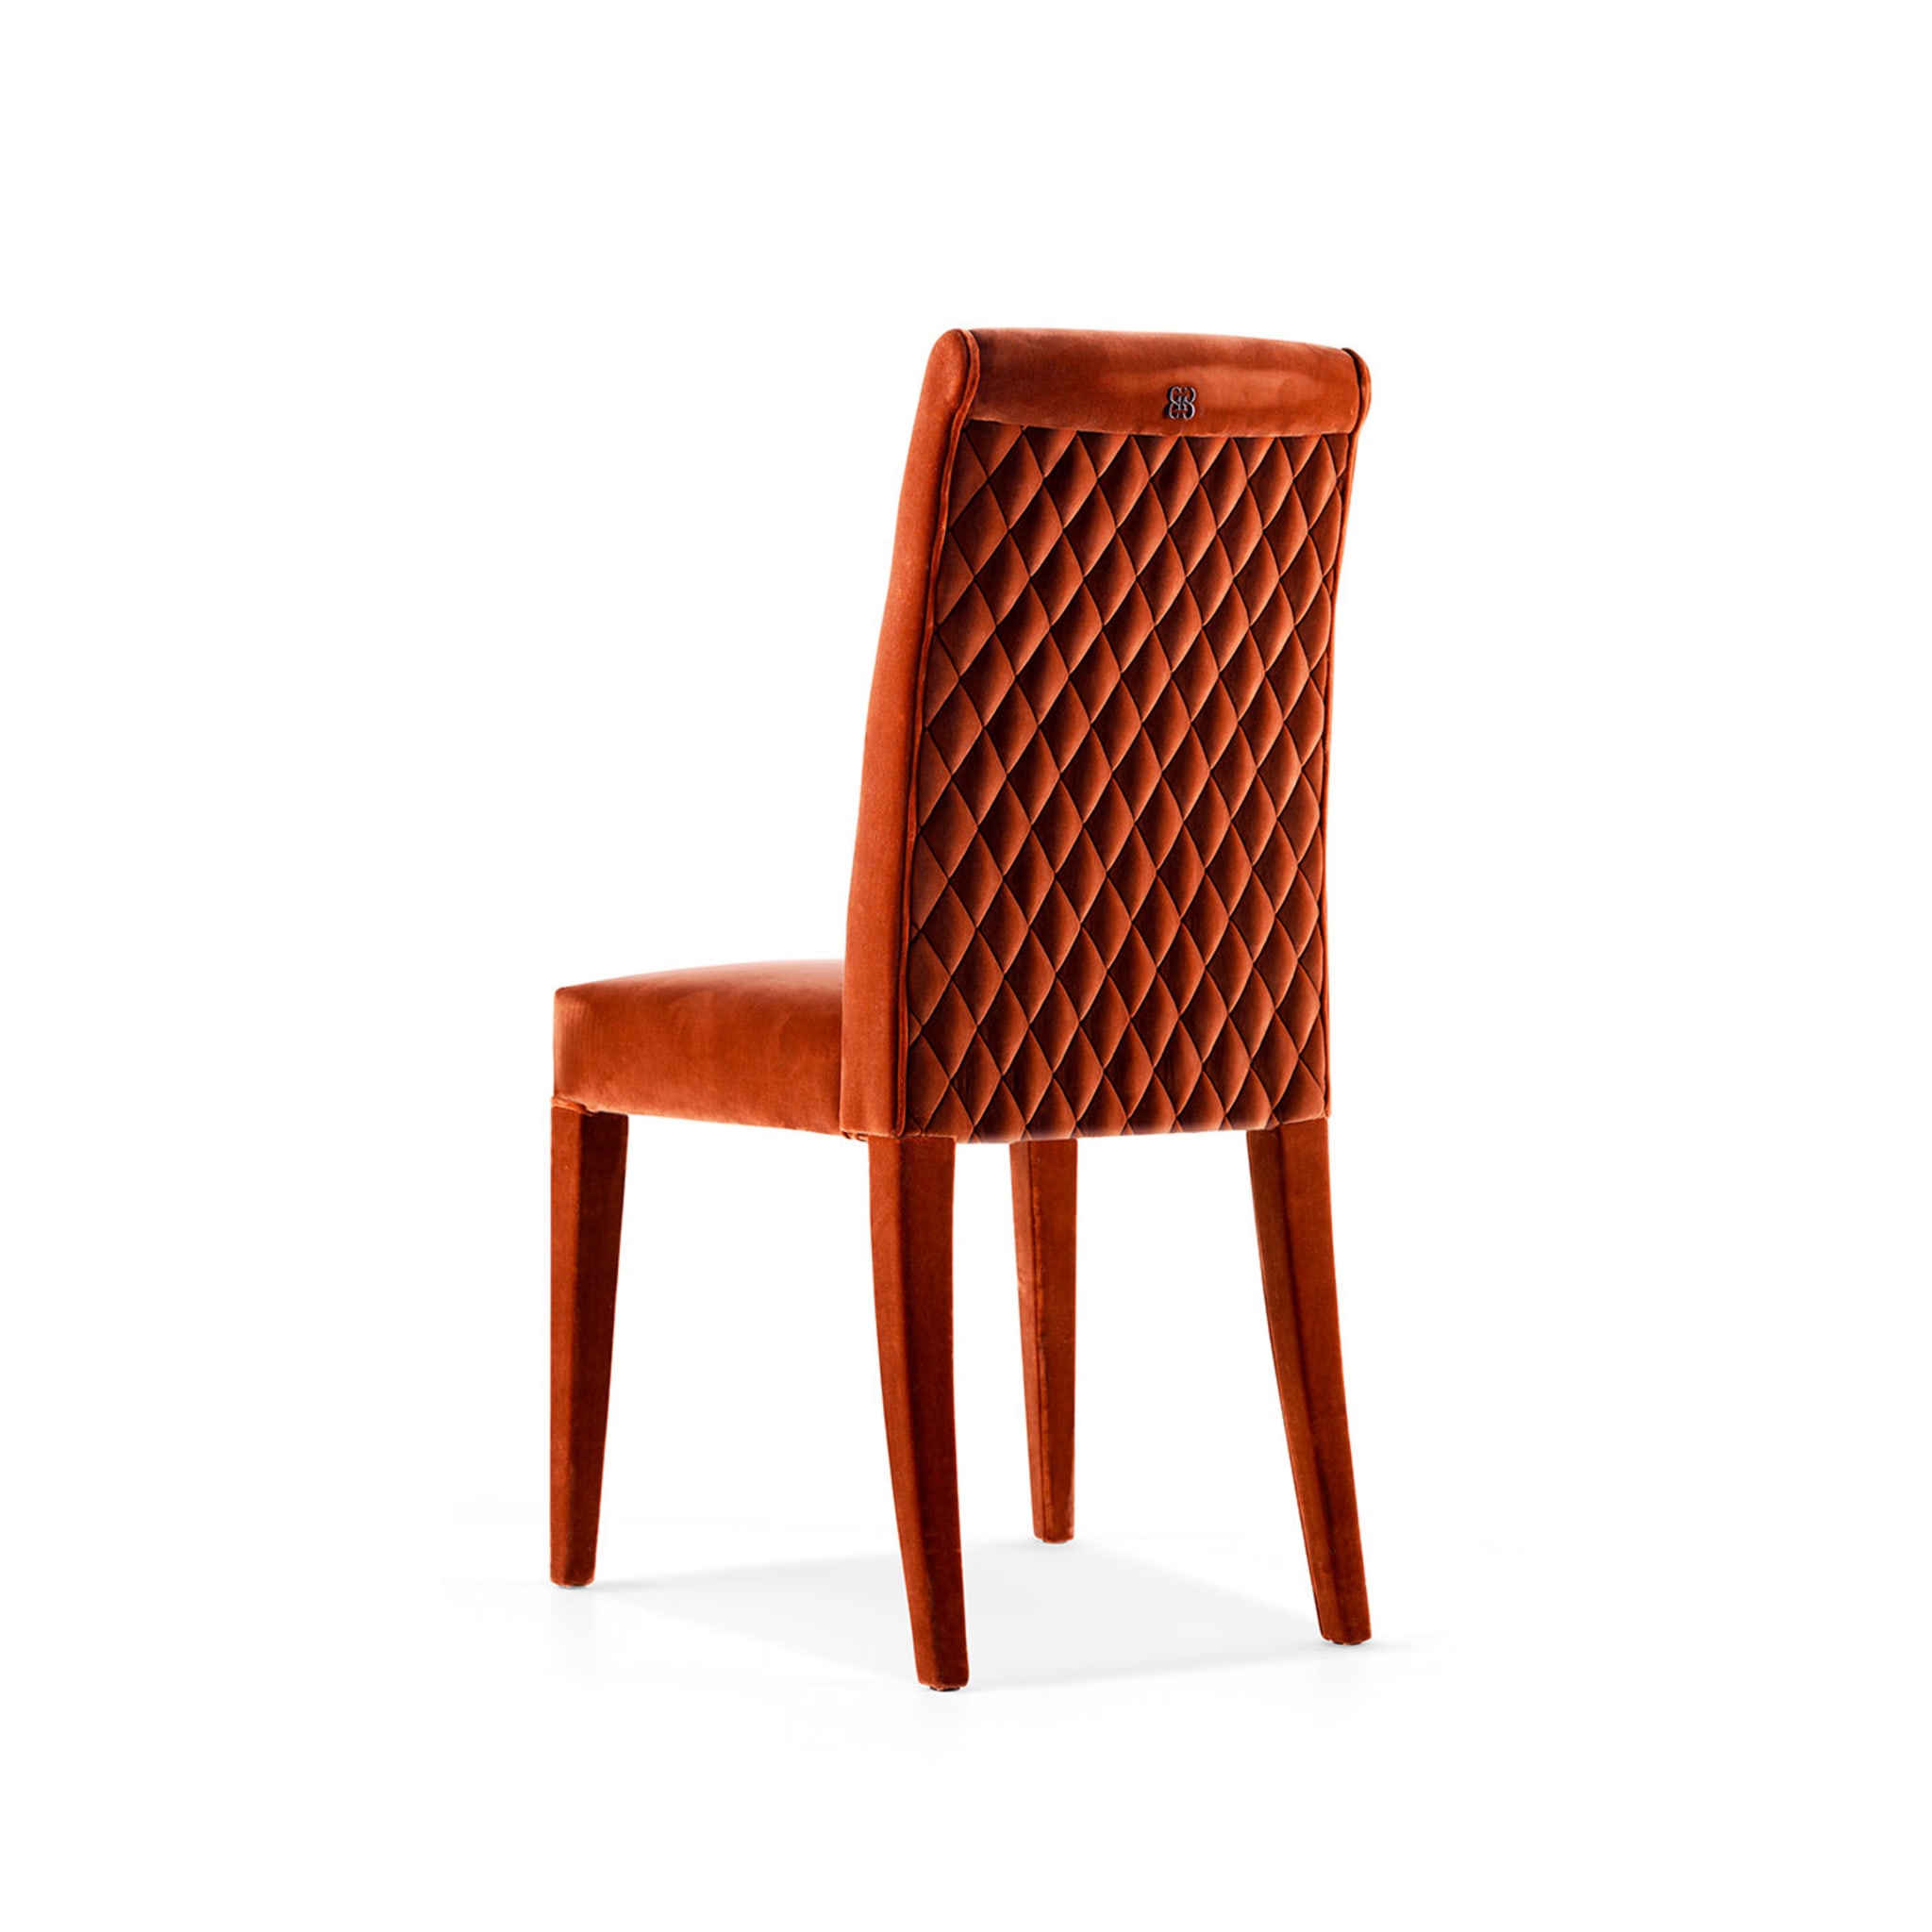 Zarafa Red Chair with Upholstered Legs - Alternative view 1